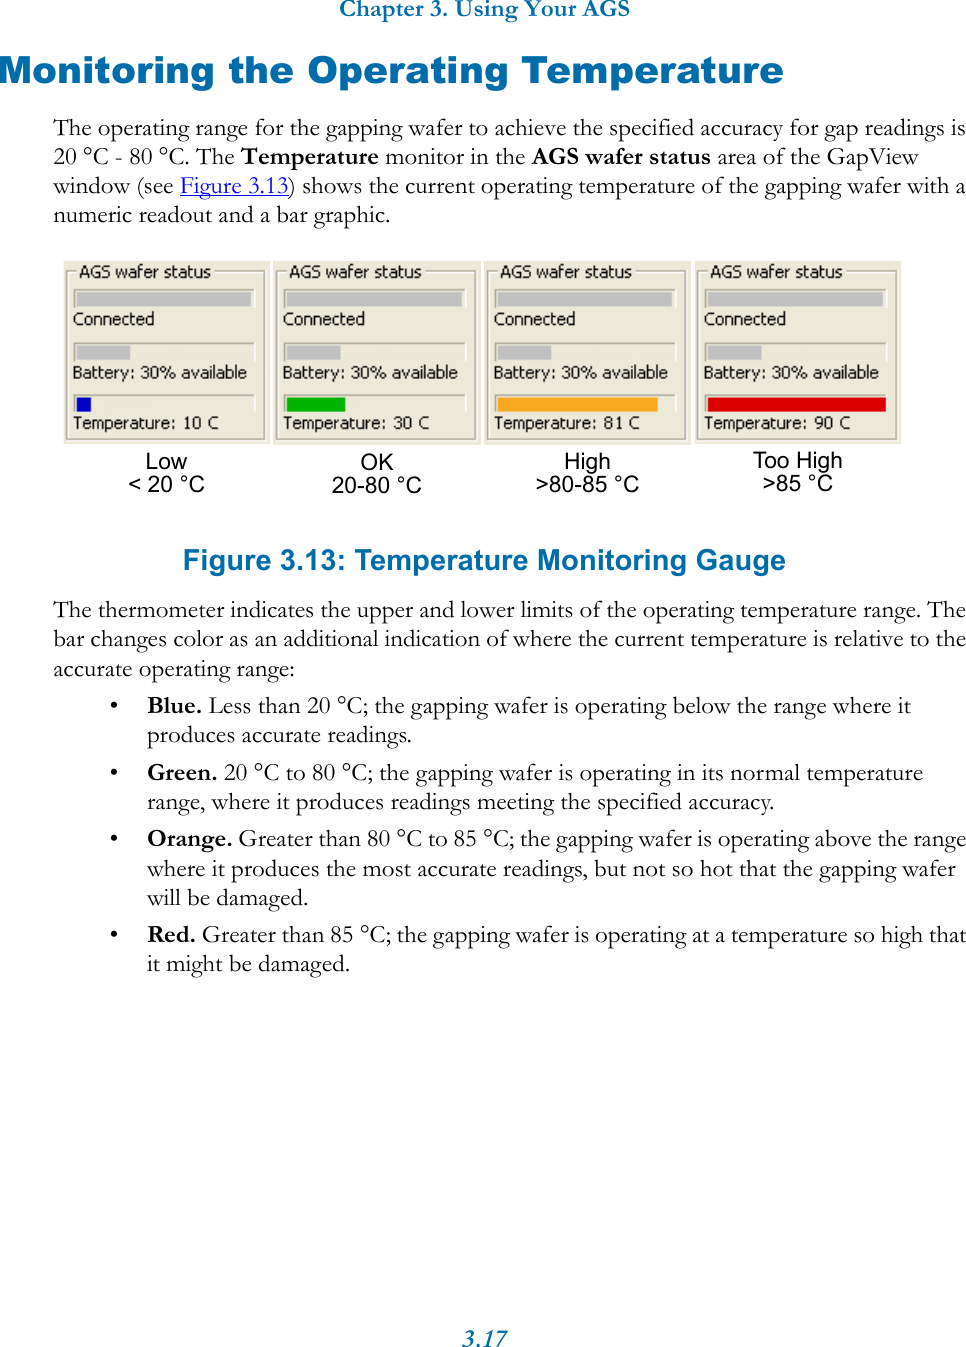 Chapter 3. Using Your AGS3.17Monitoring the Operating TemperatureThe operating range for the gapping wafer to achieve the specified accuracy for gap readings is 20 °C - 80 °C. The Temperature monitor in the AGS wafer status area of the GapView window (see Figure 3.13) shows the current operating temperature of the gapping wafer with a numeric readout and a bar graphic. Figure 3.13: Temperature Monitoring GaugeThe thermometer indicates the upper and lower limits of the operating temperature range. The bar changes color as an additional indication of where the current temperature is relative to the accurate operating range:•Blue. Less than 20 °C; the gapping wafer is operating below the range where it produces accurate readings.•Green. 20 °C to 80 °C; the gapping wafer is operating in its normal temperature range, where it produces readings meeting the specified accuracy.•Orange. Greater than 80 °C to 85 °C; the gapping wafer is operating above the range where it produces the most accurate readings, but not so hot that the gapping wafer will be damaged.•Red. Greater than 85 °C; the gapping wafer is operating at a temperature so high that it might be damaged.High&gt;80-85 °C Too High&gt;85 °CLow&lt; 20 °C OK20-80 °C